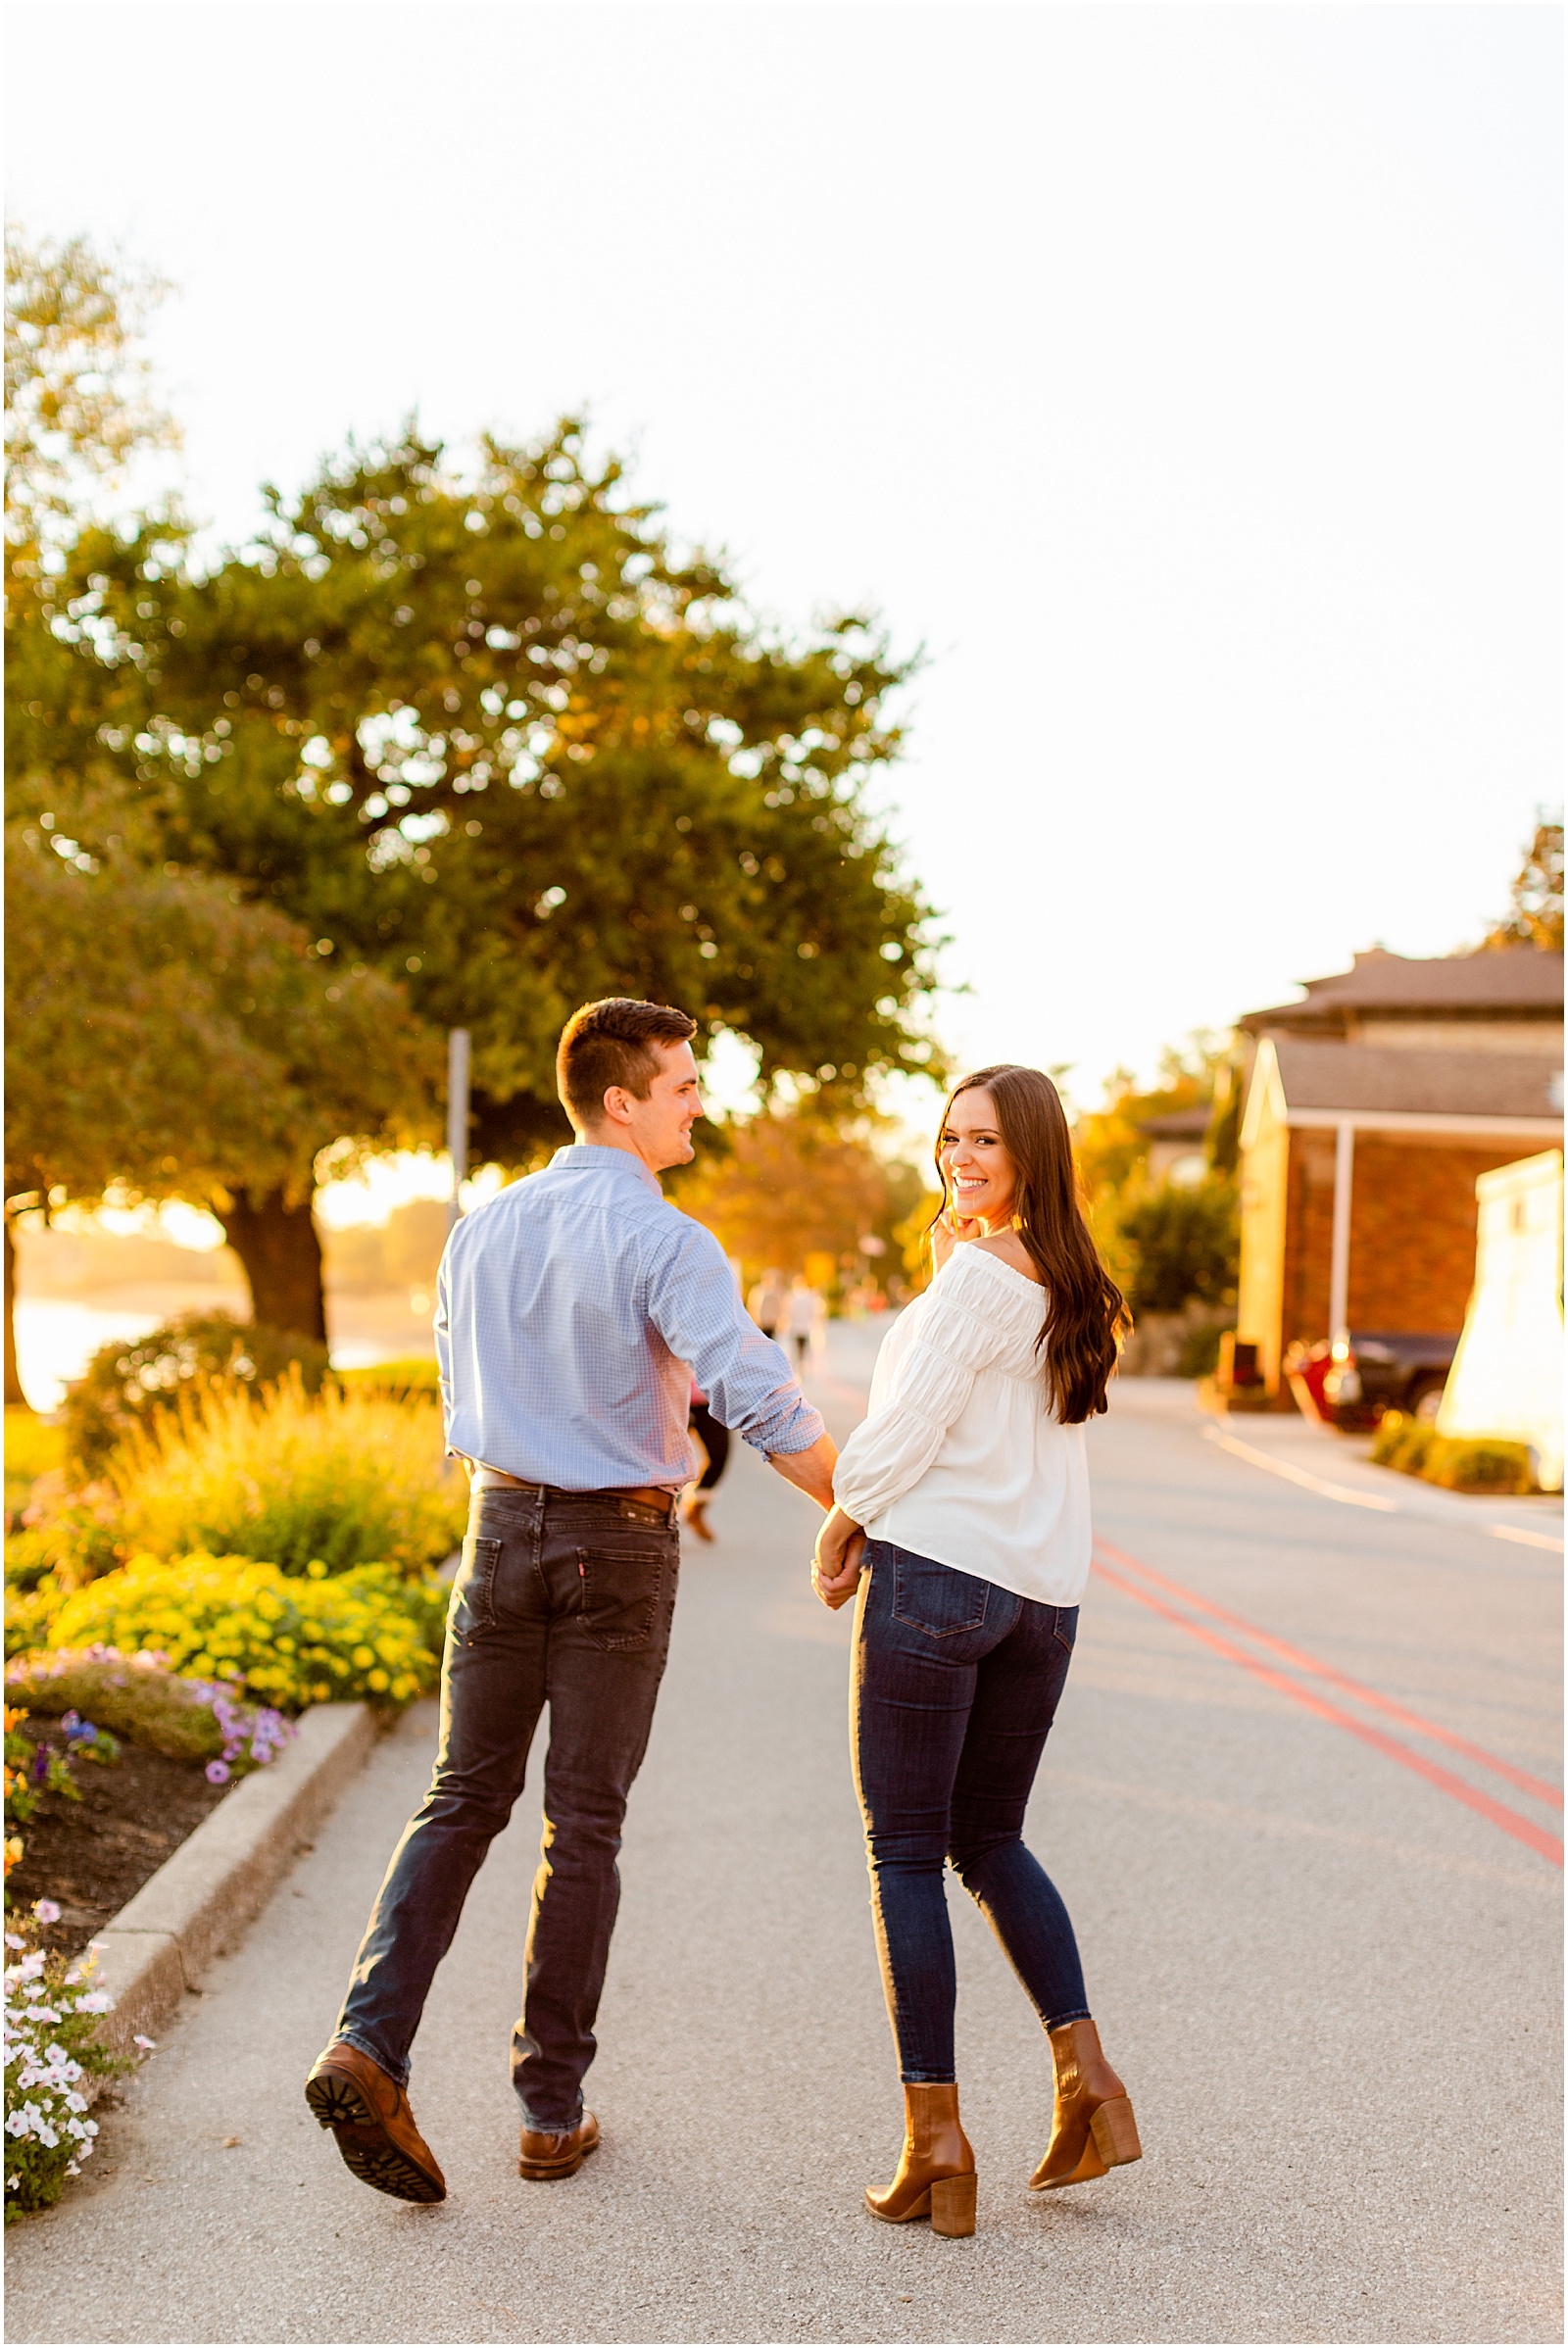 Emma and Jace's Downtown Newburgh Engagement Session | Bret and Brandie Photography | Evansville Indiana Wedding Photographers_0052.jpg